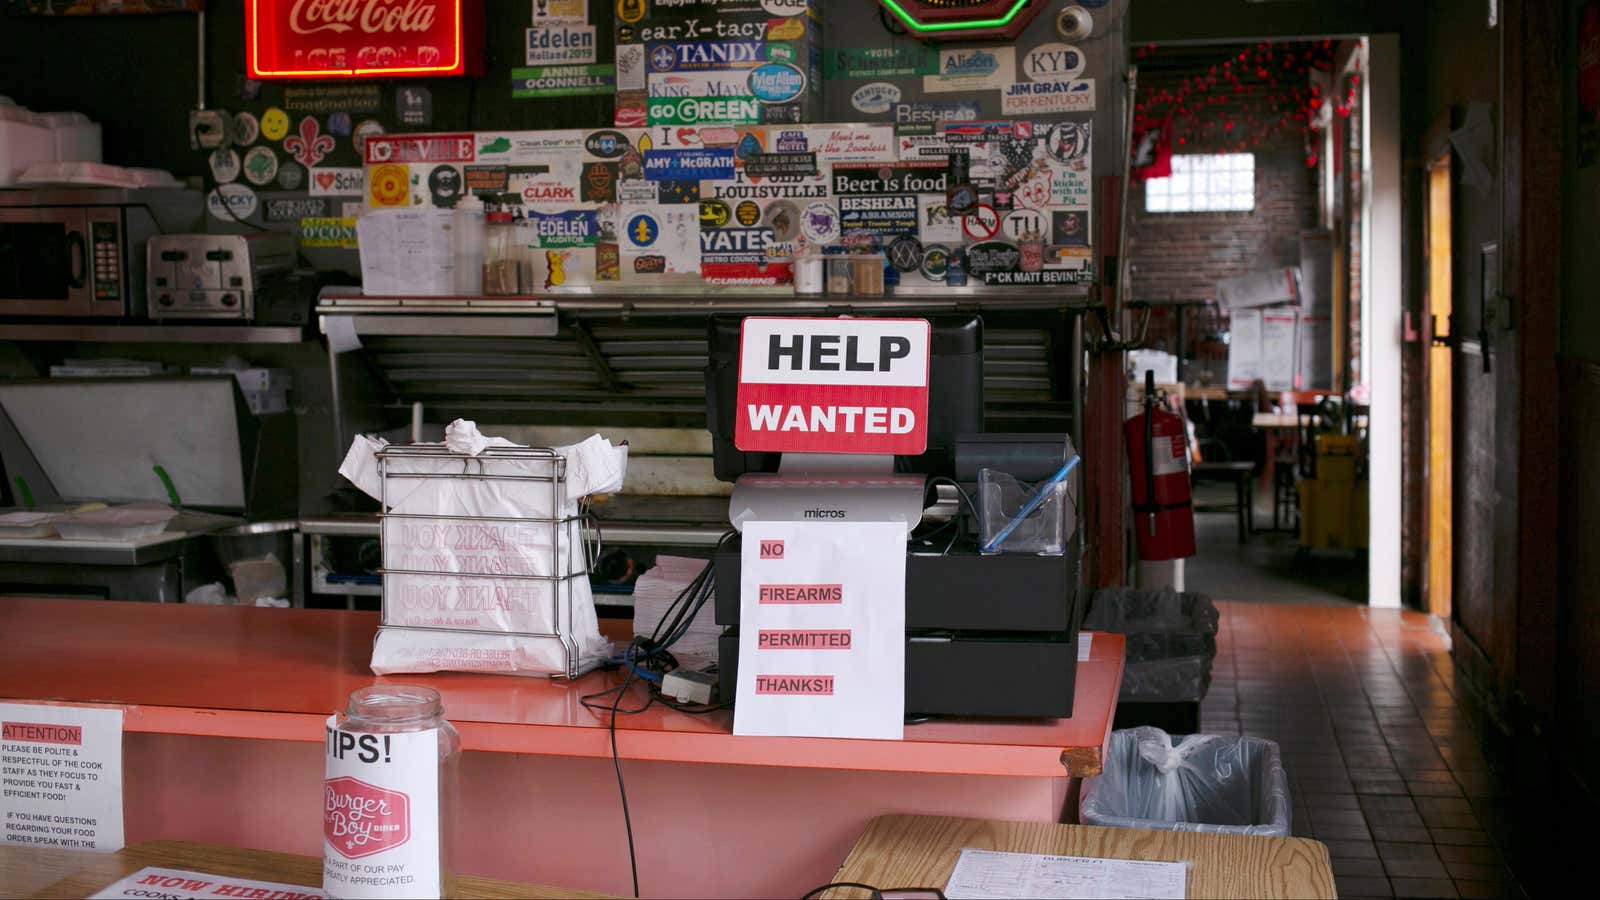 A restaurant in Louisville, Kentucky is trying to hire workers.